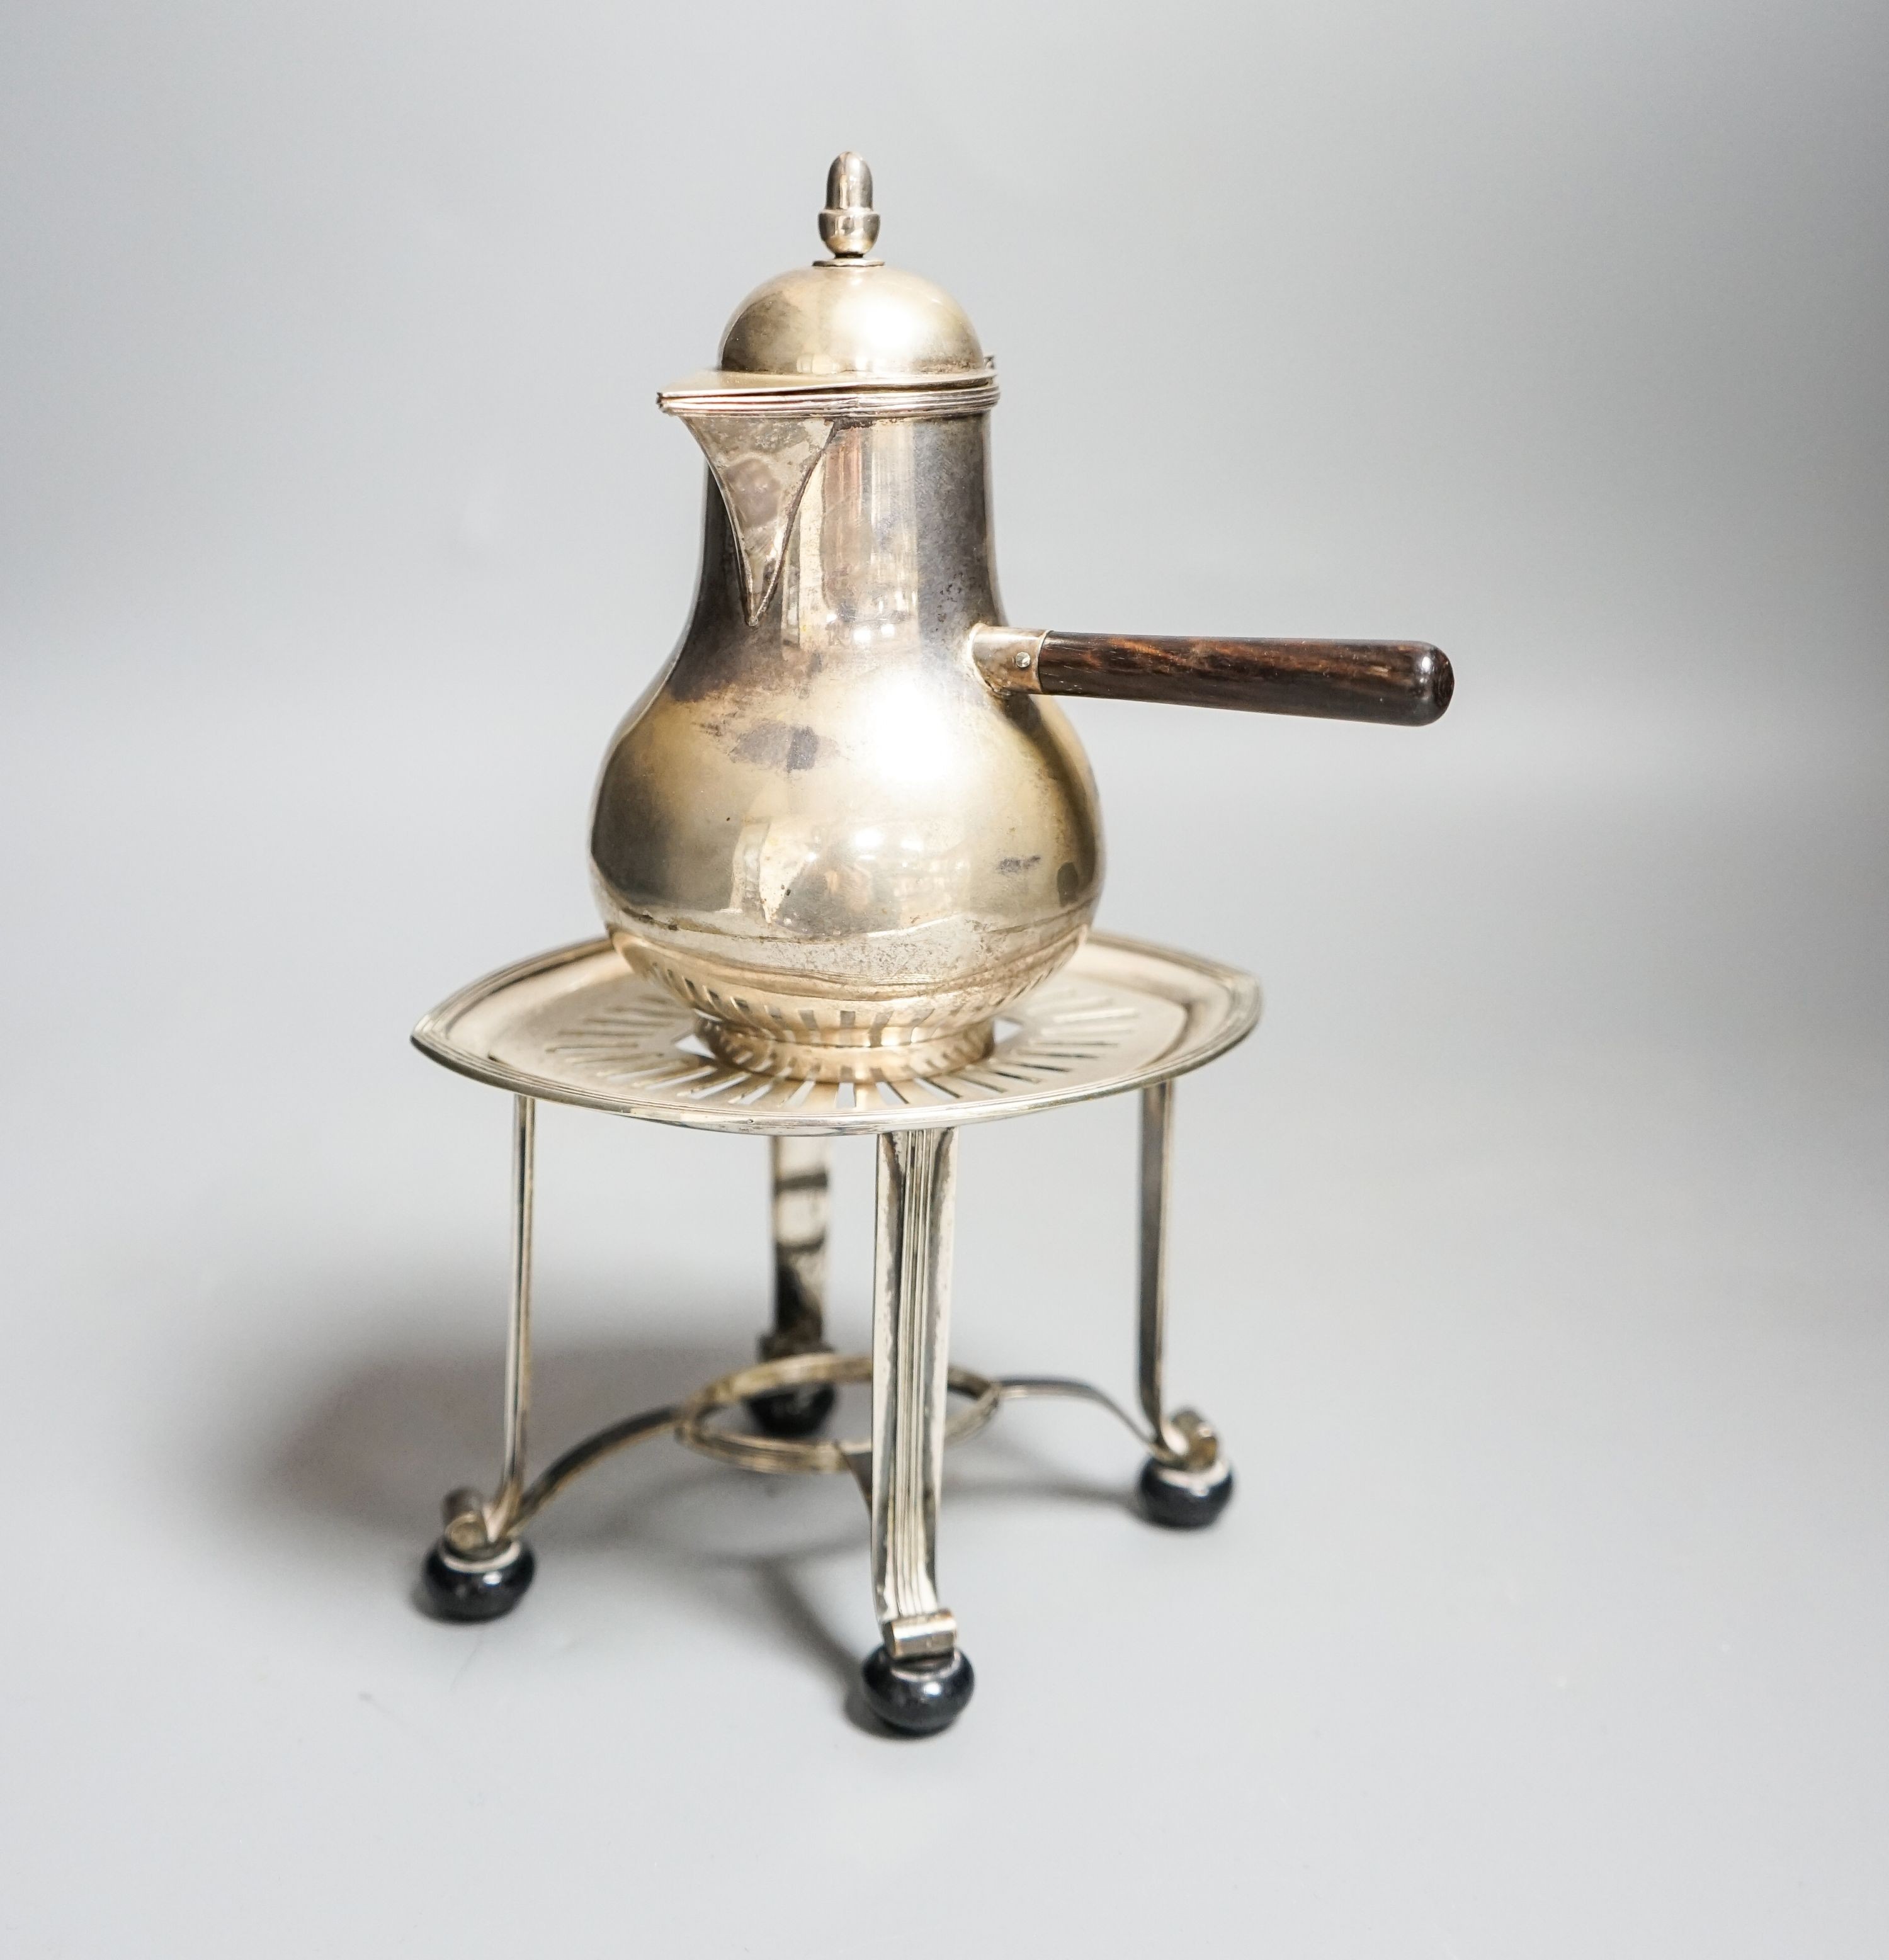 A Dutch white metal cafe-au-lait pot, with hinged cover, acorn finial and wooden handle, height 13cm, together with a Dutch white metal stand, gross 9.5oz.